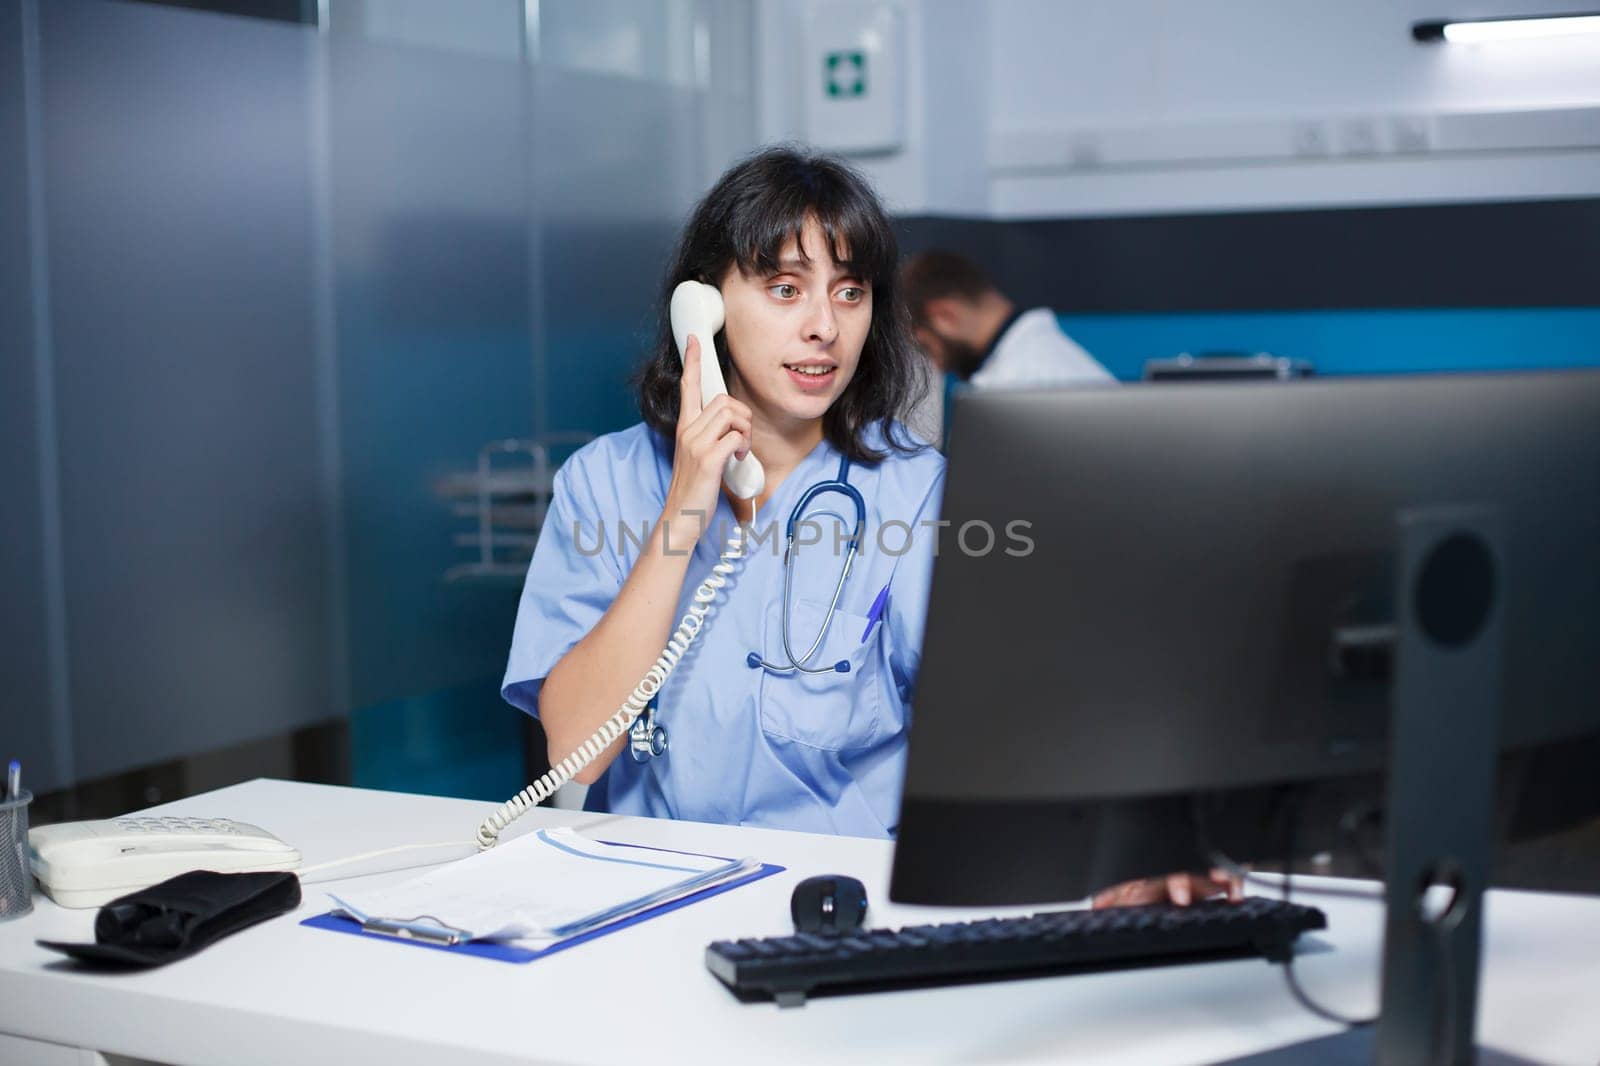 In the hospital office, a medical practitioner answers phones and schedules appointments. In a modern clinic, a health care provider sits at a desk, using a landline and staring at a monitor.